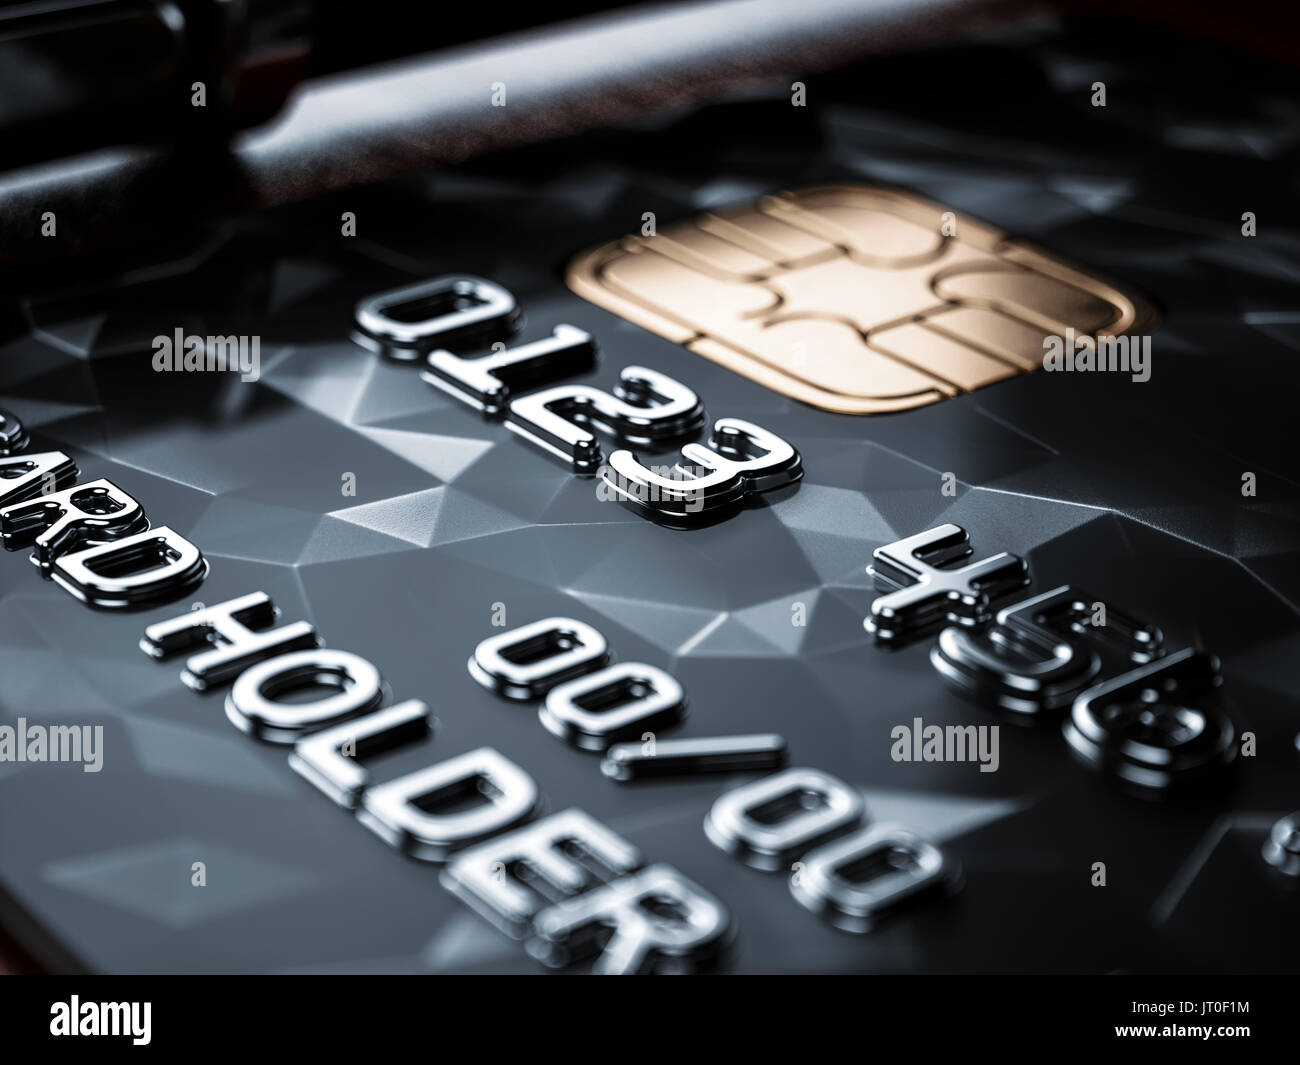 Selective focus point on black credit card background. Business concept image. 3d rendering illustration Stock Photo